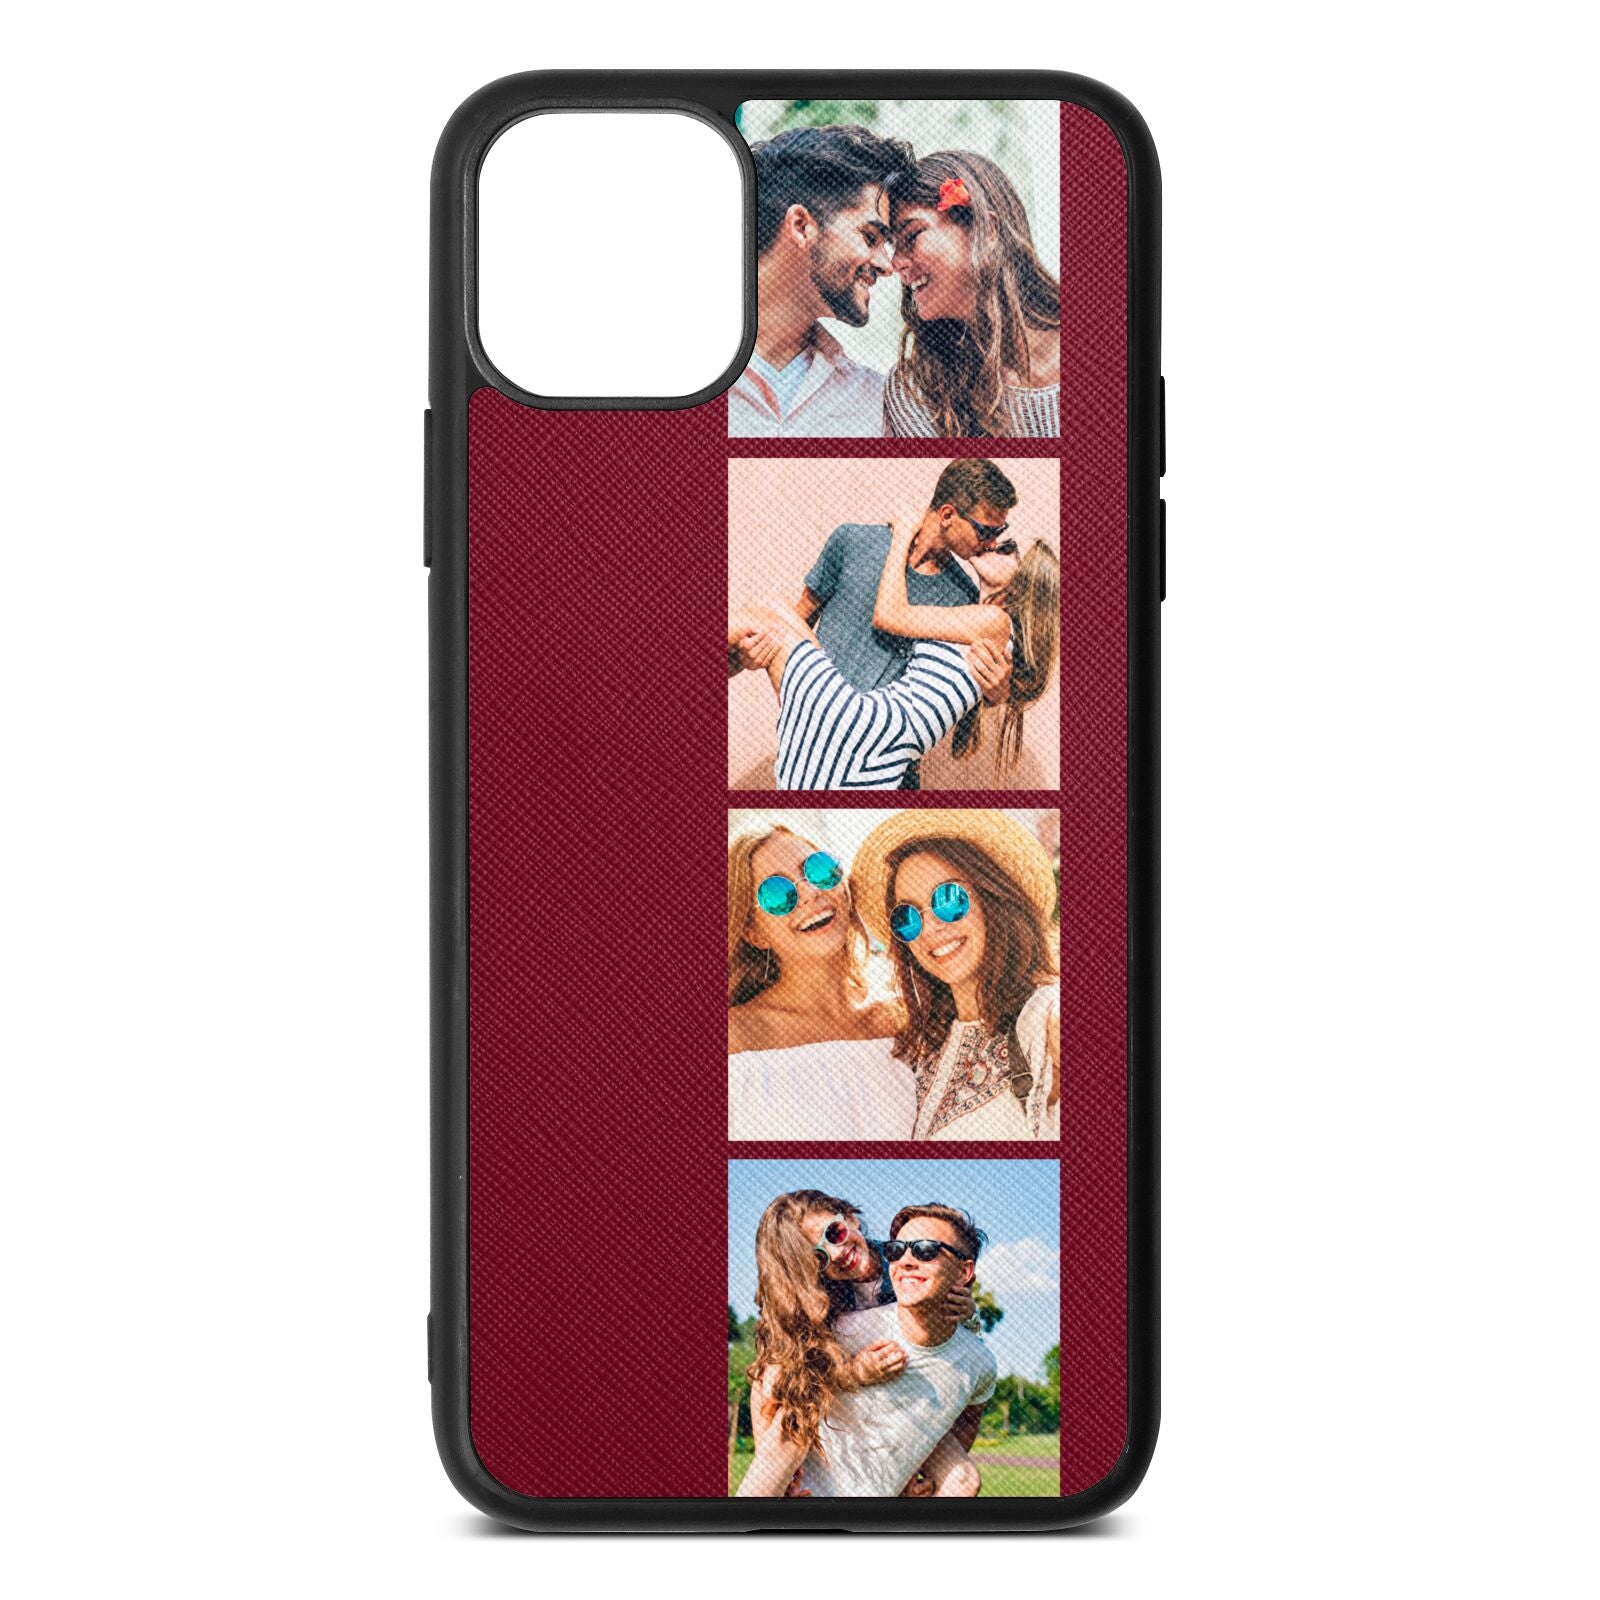 Photo Strip Montage Upload Wine Red Saffiano Leather iPhone 11 Pro Max Case